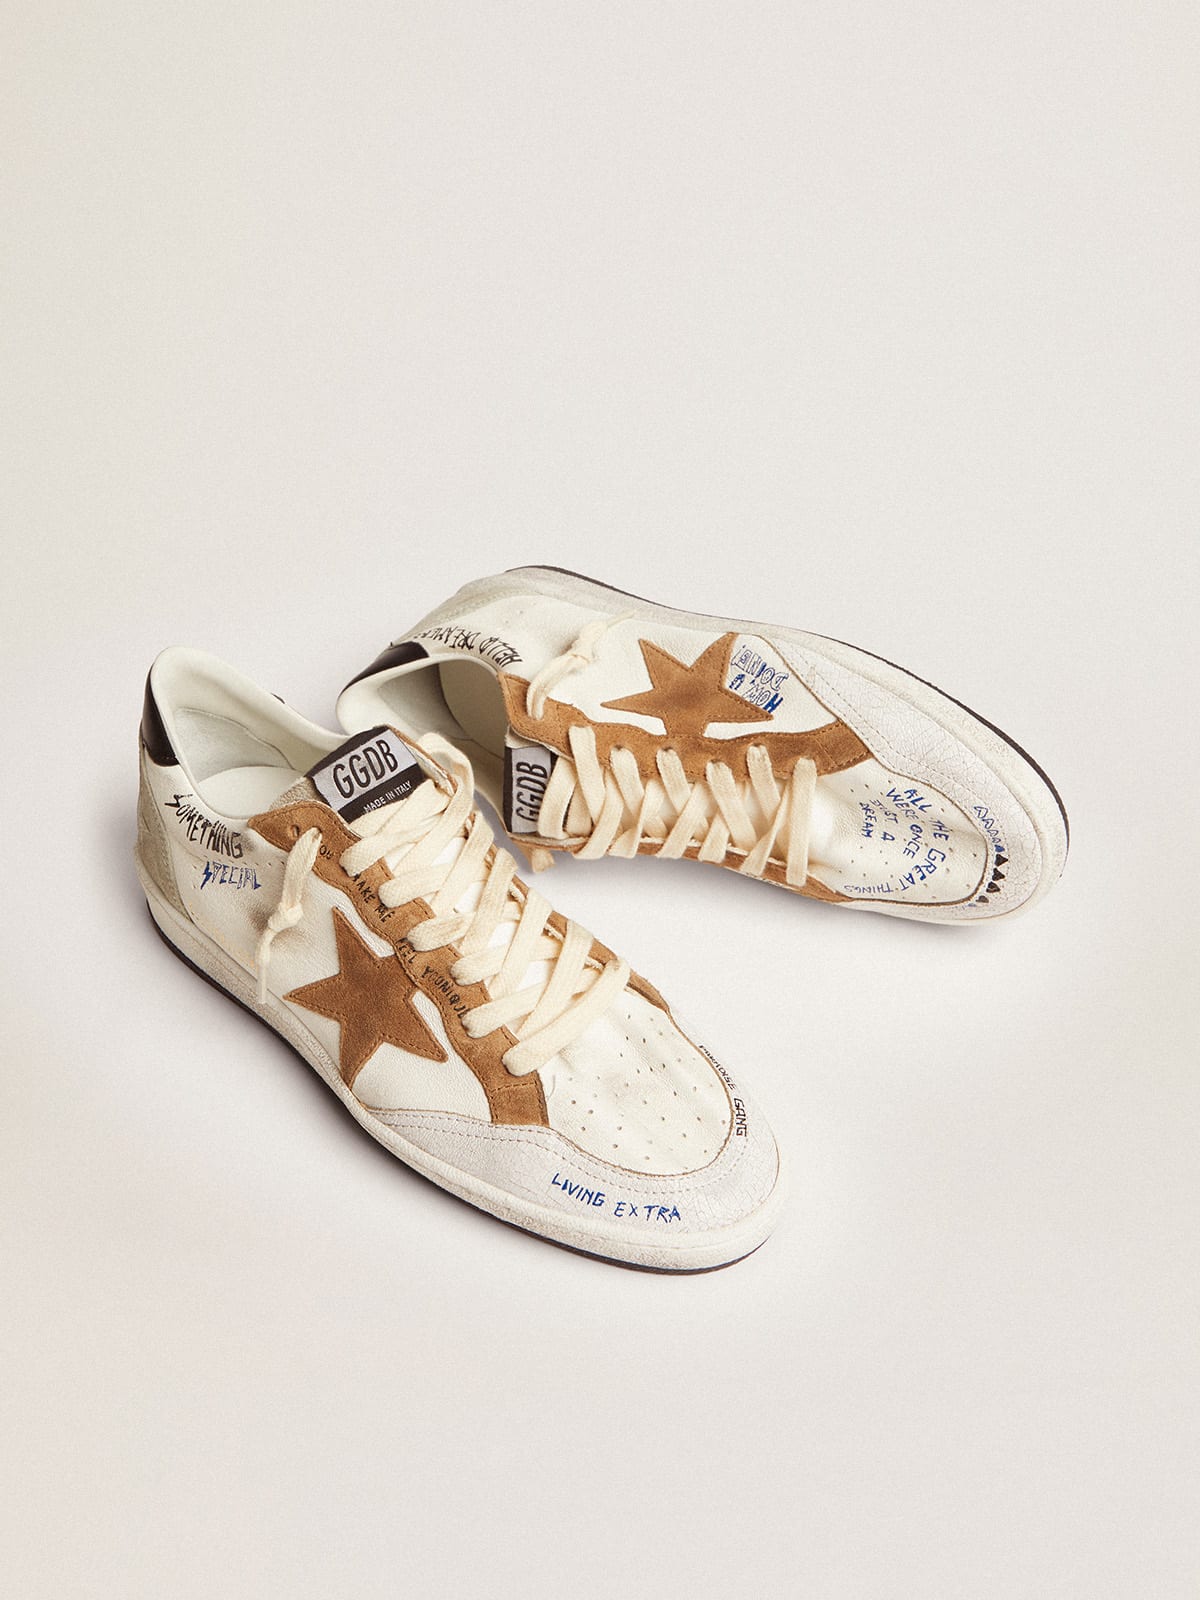 Golden Goose - Women's Ball Star with tobacco-colored suede star in 